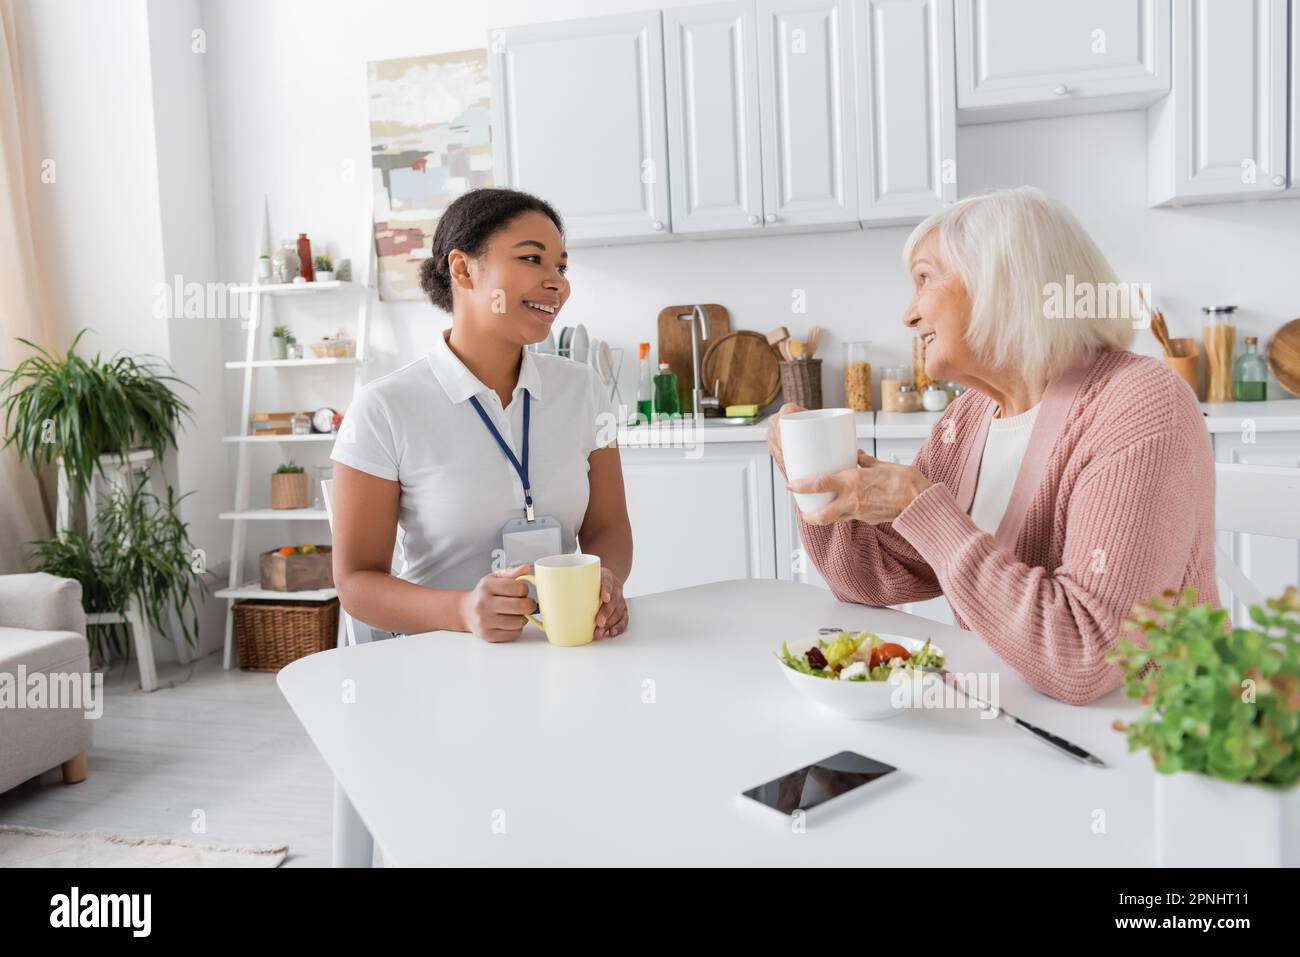 happy multiracial social worker having tea with senior woman in kitchen Stock Photo